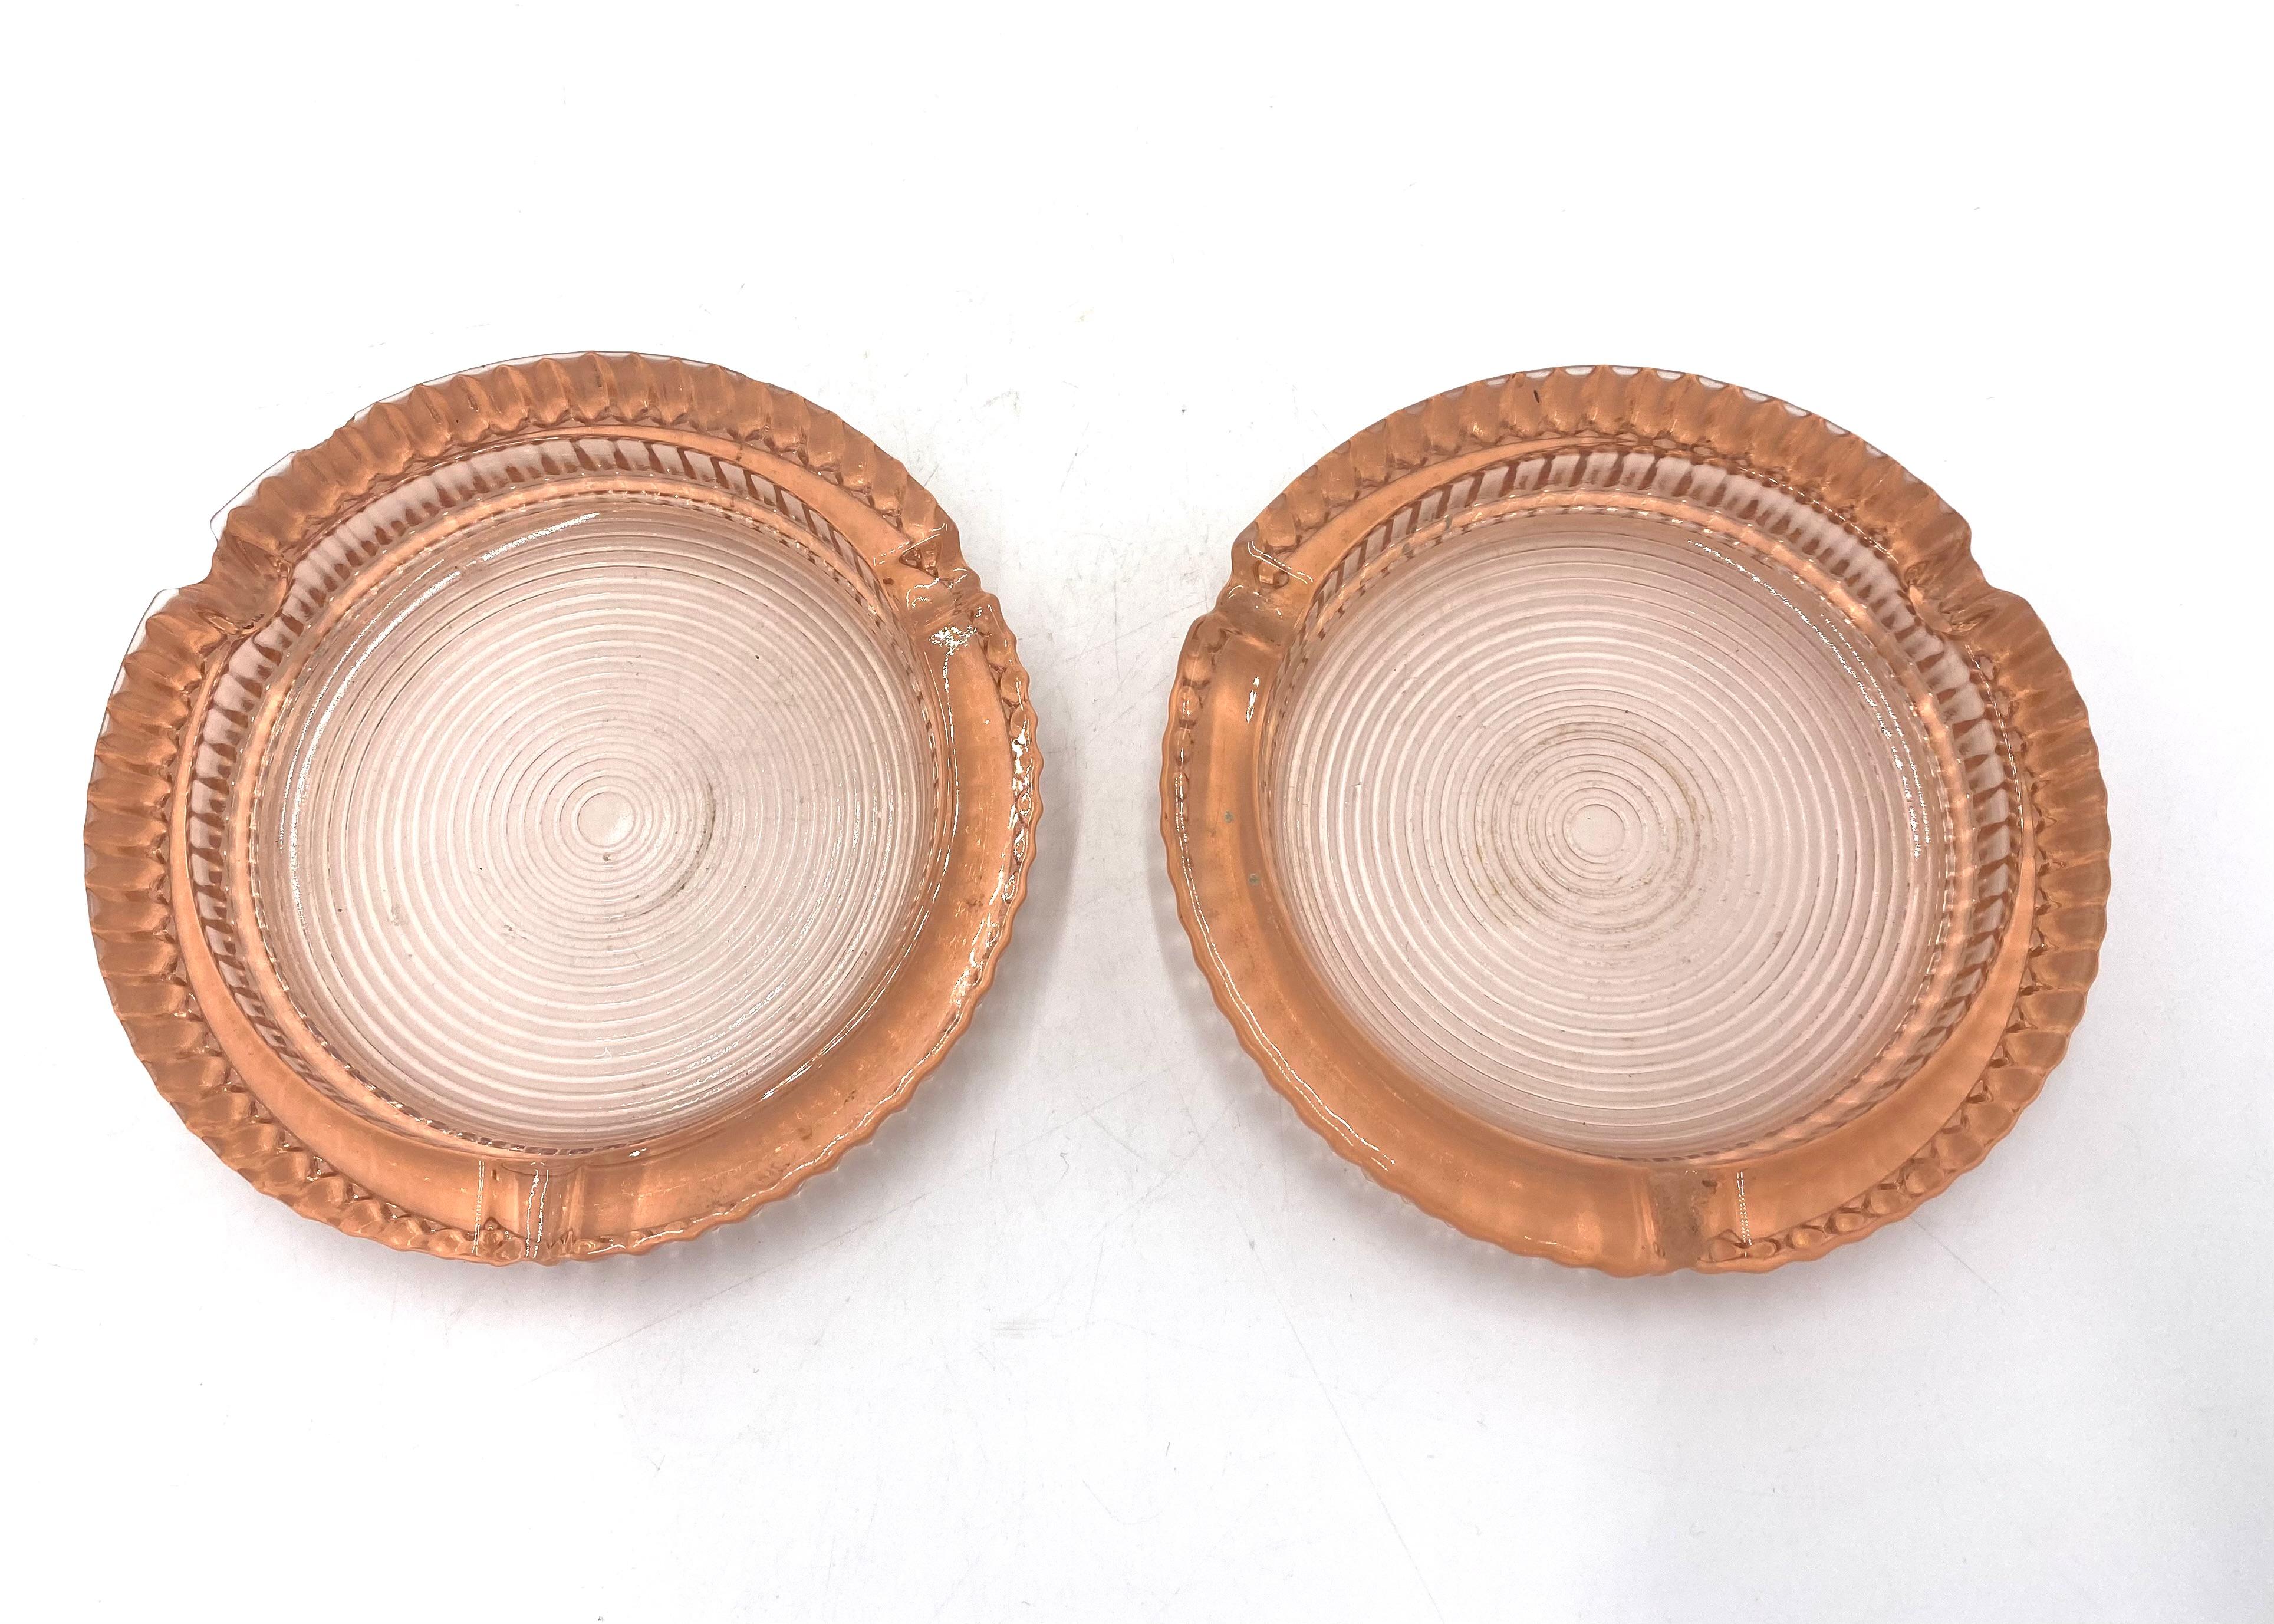 Two salmon / rose colored glass ashtrays

Very good condition

Made in Poland in the 1930s

height 2 cm, diameter 12.5 cm.